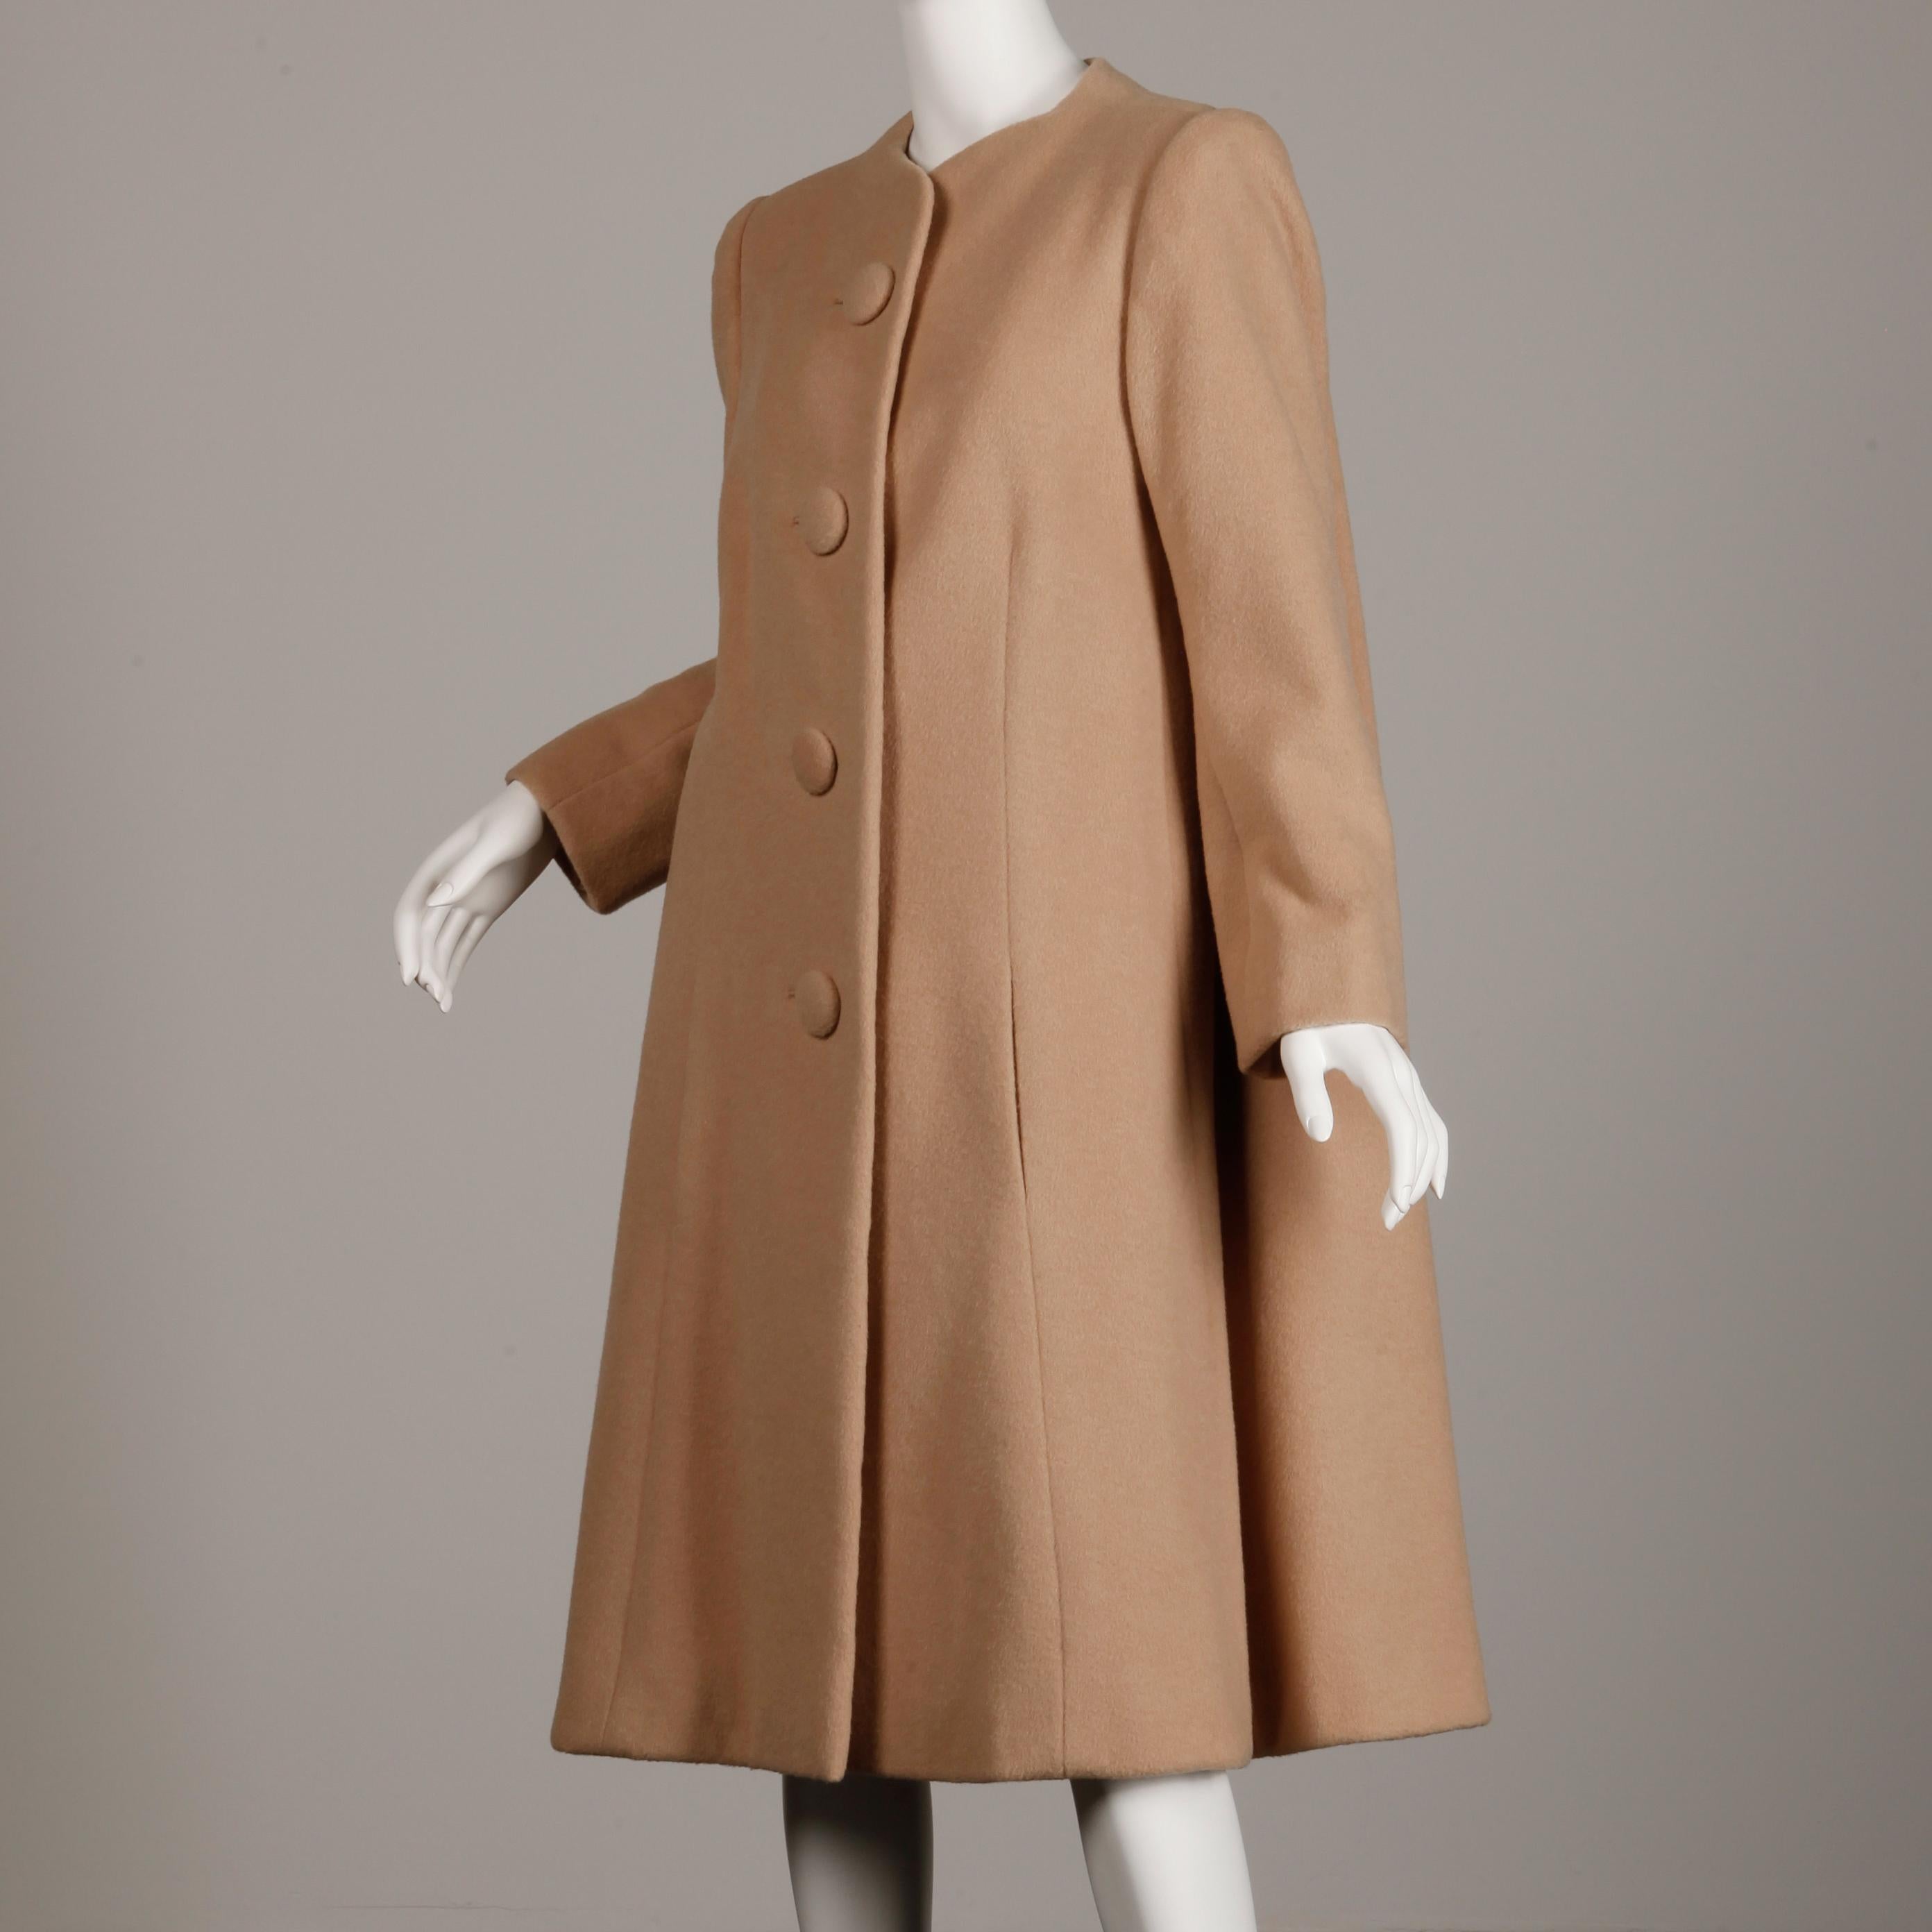 Women's Arnold Scaasi Couture Vintage Camel Wool Coat, 1960s  For Sale